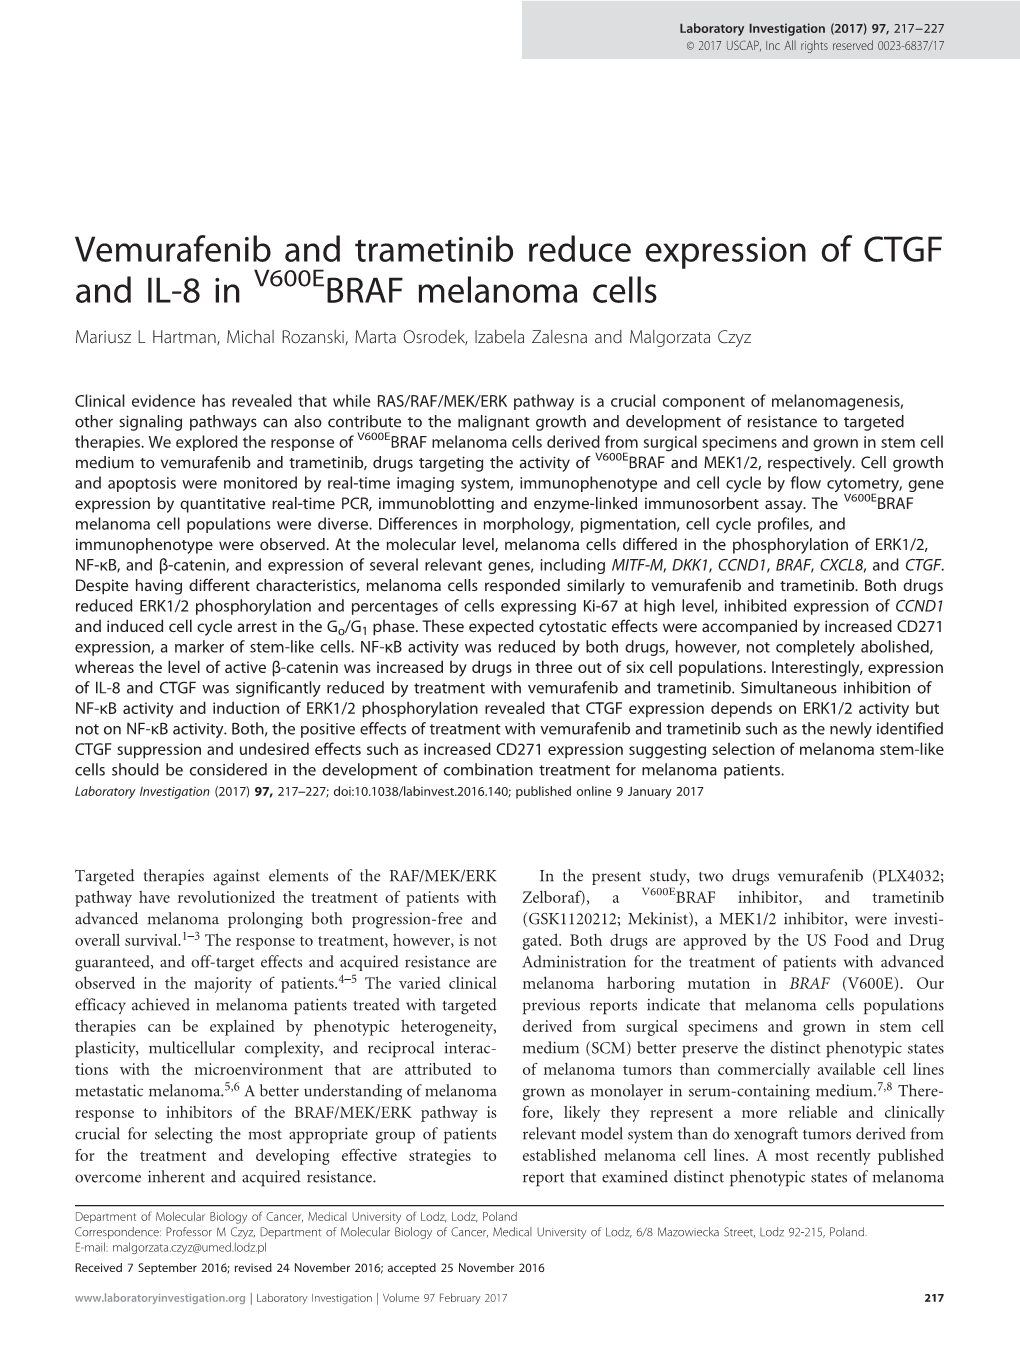 Vemurafenib and Trametinib Reduce Expression of CTGF and IL-8 In